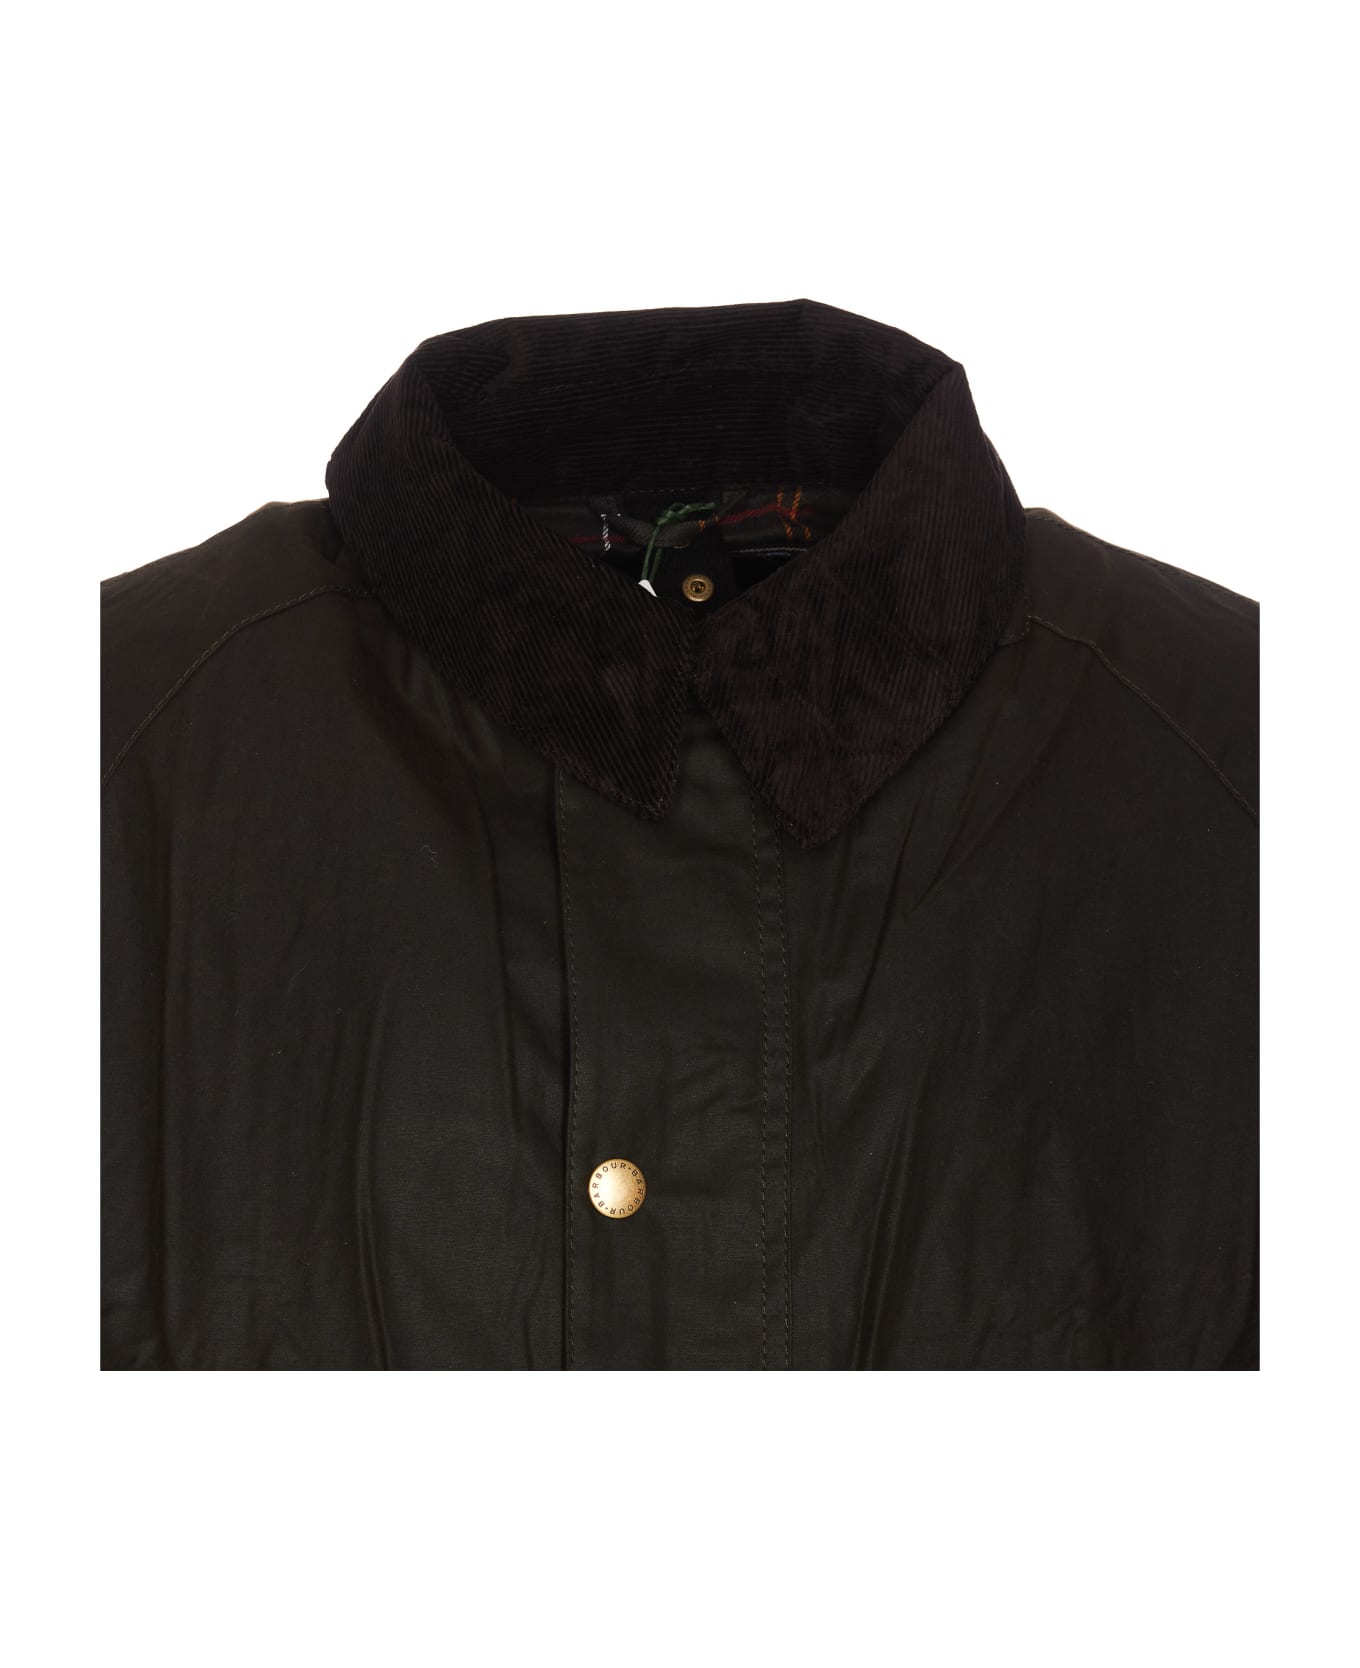 Barbour Ashby Wax Jacket - Green